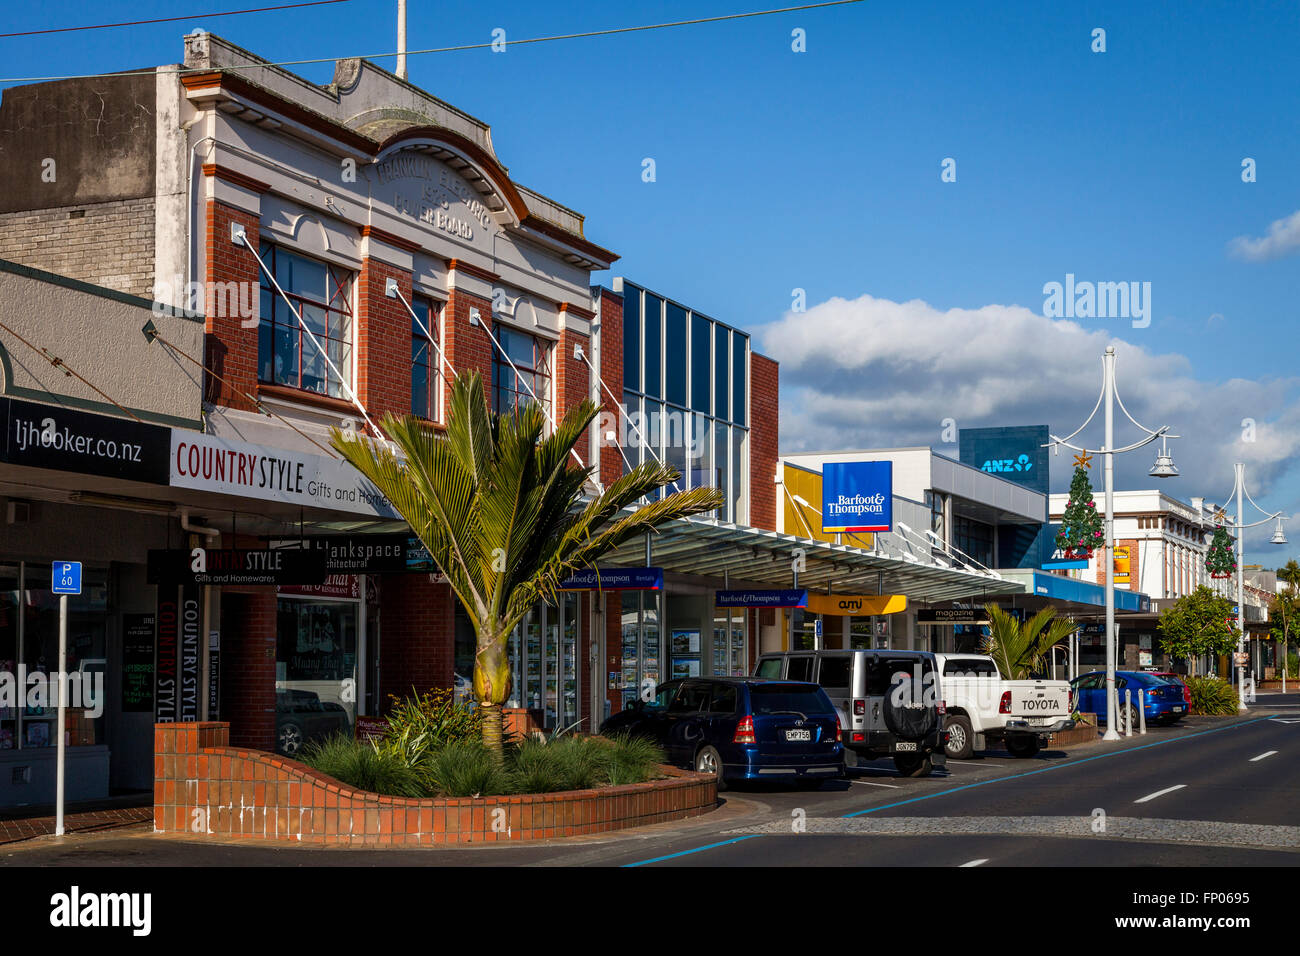 A Street In The Town Of Pukekohe, North Island, New Zealand Stock Photo